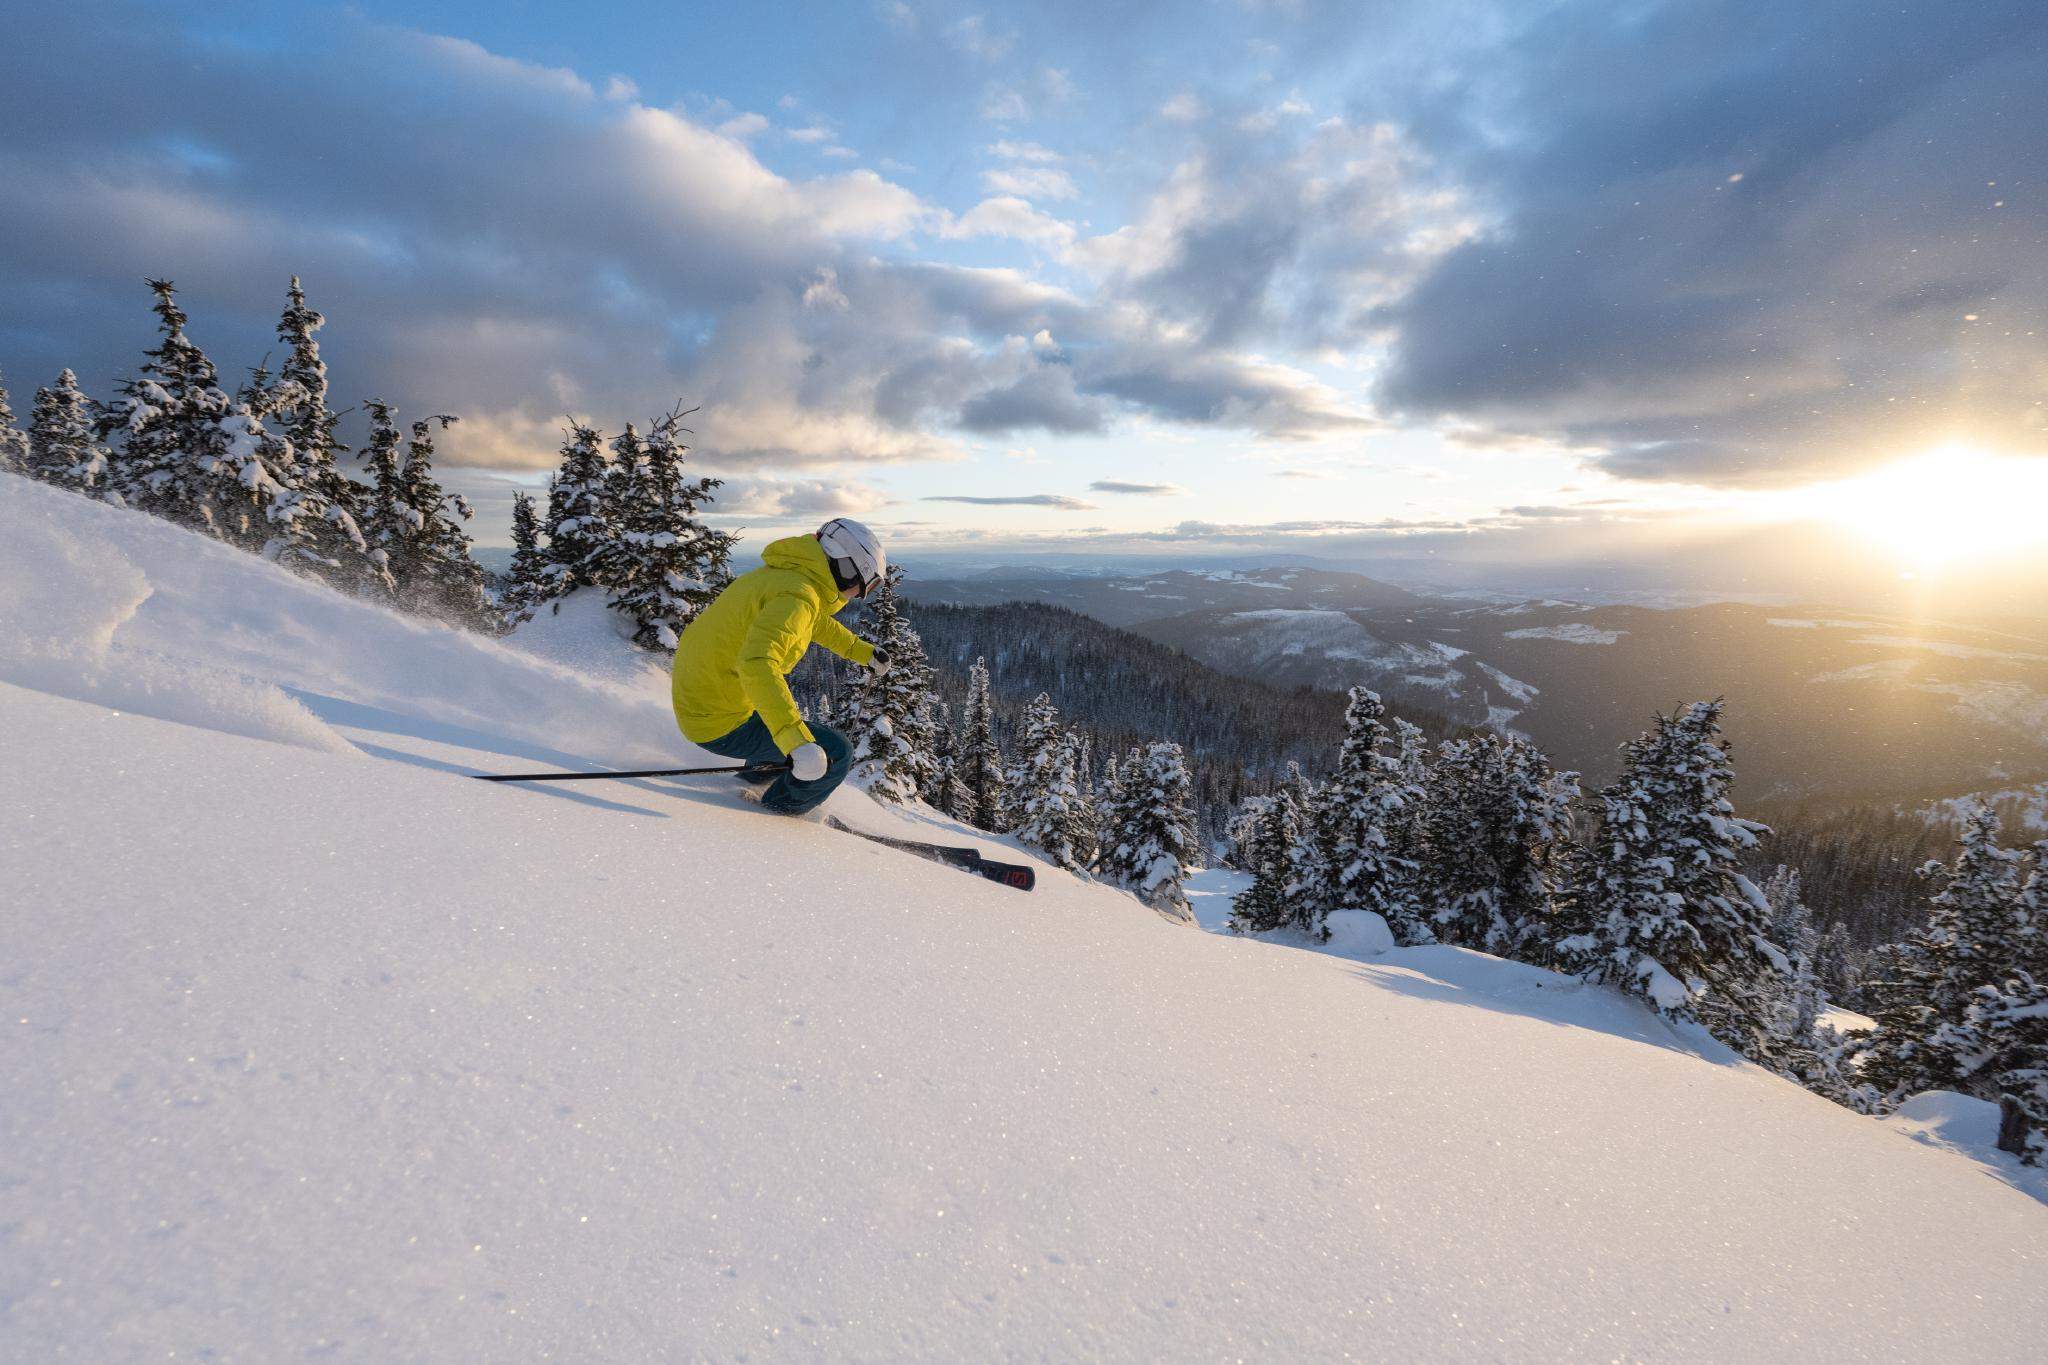 lone skier in a yellow jacket carving down a mountain in canada in powder with the sun setting over Sun Peaks